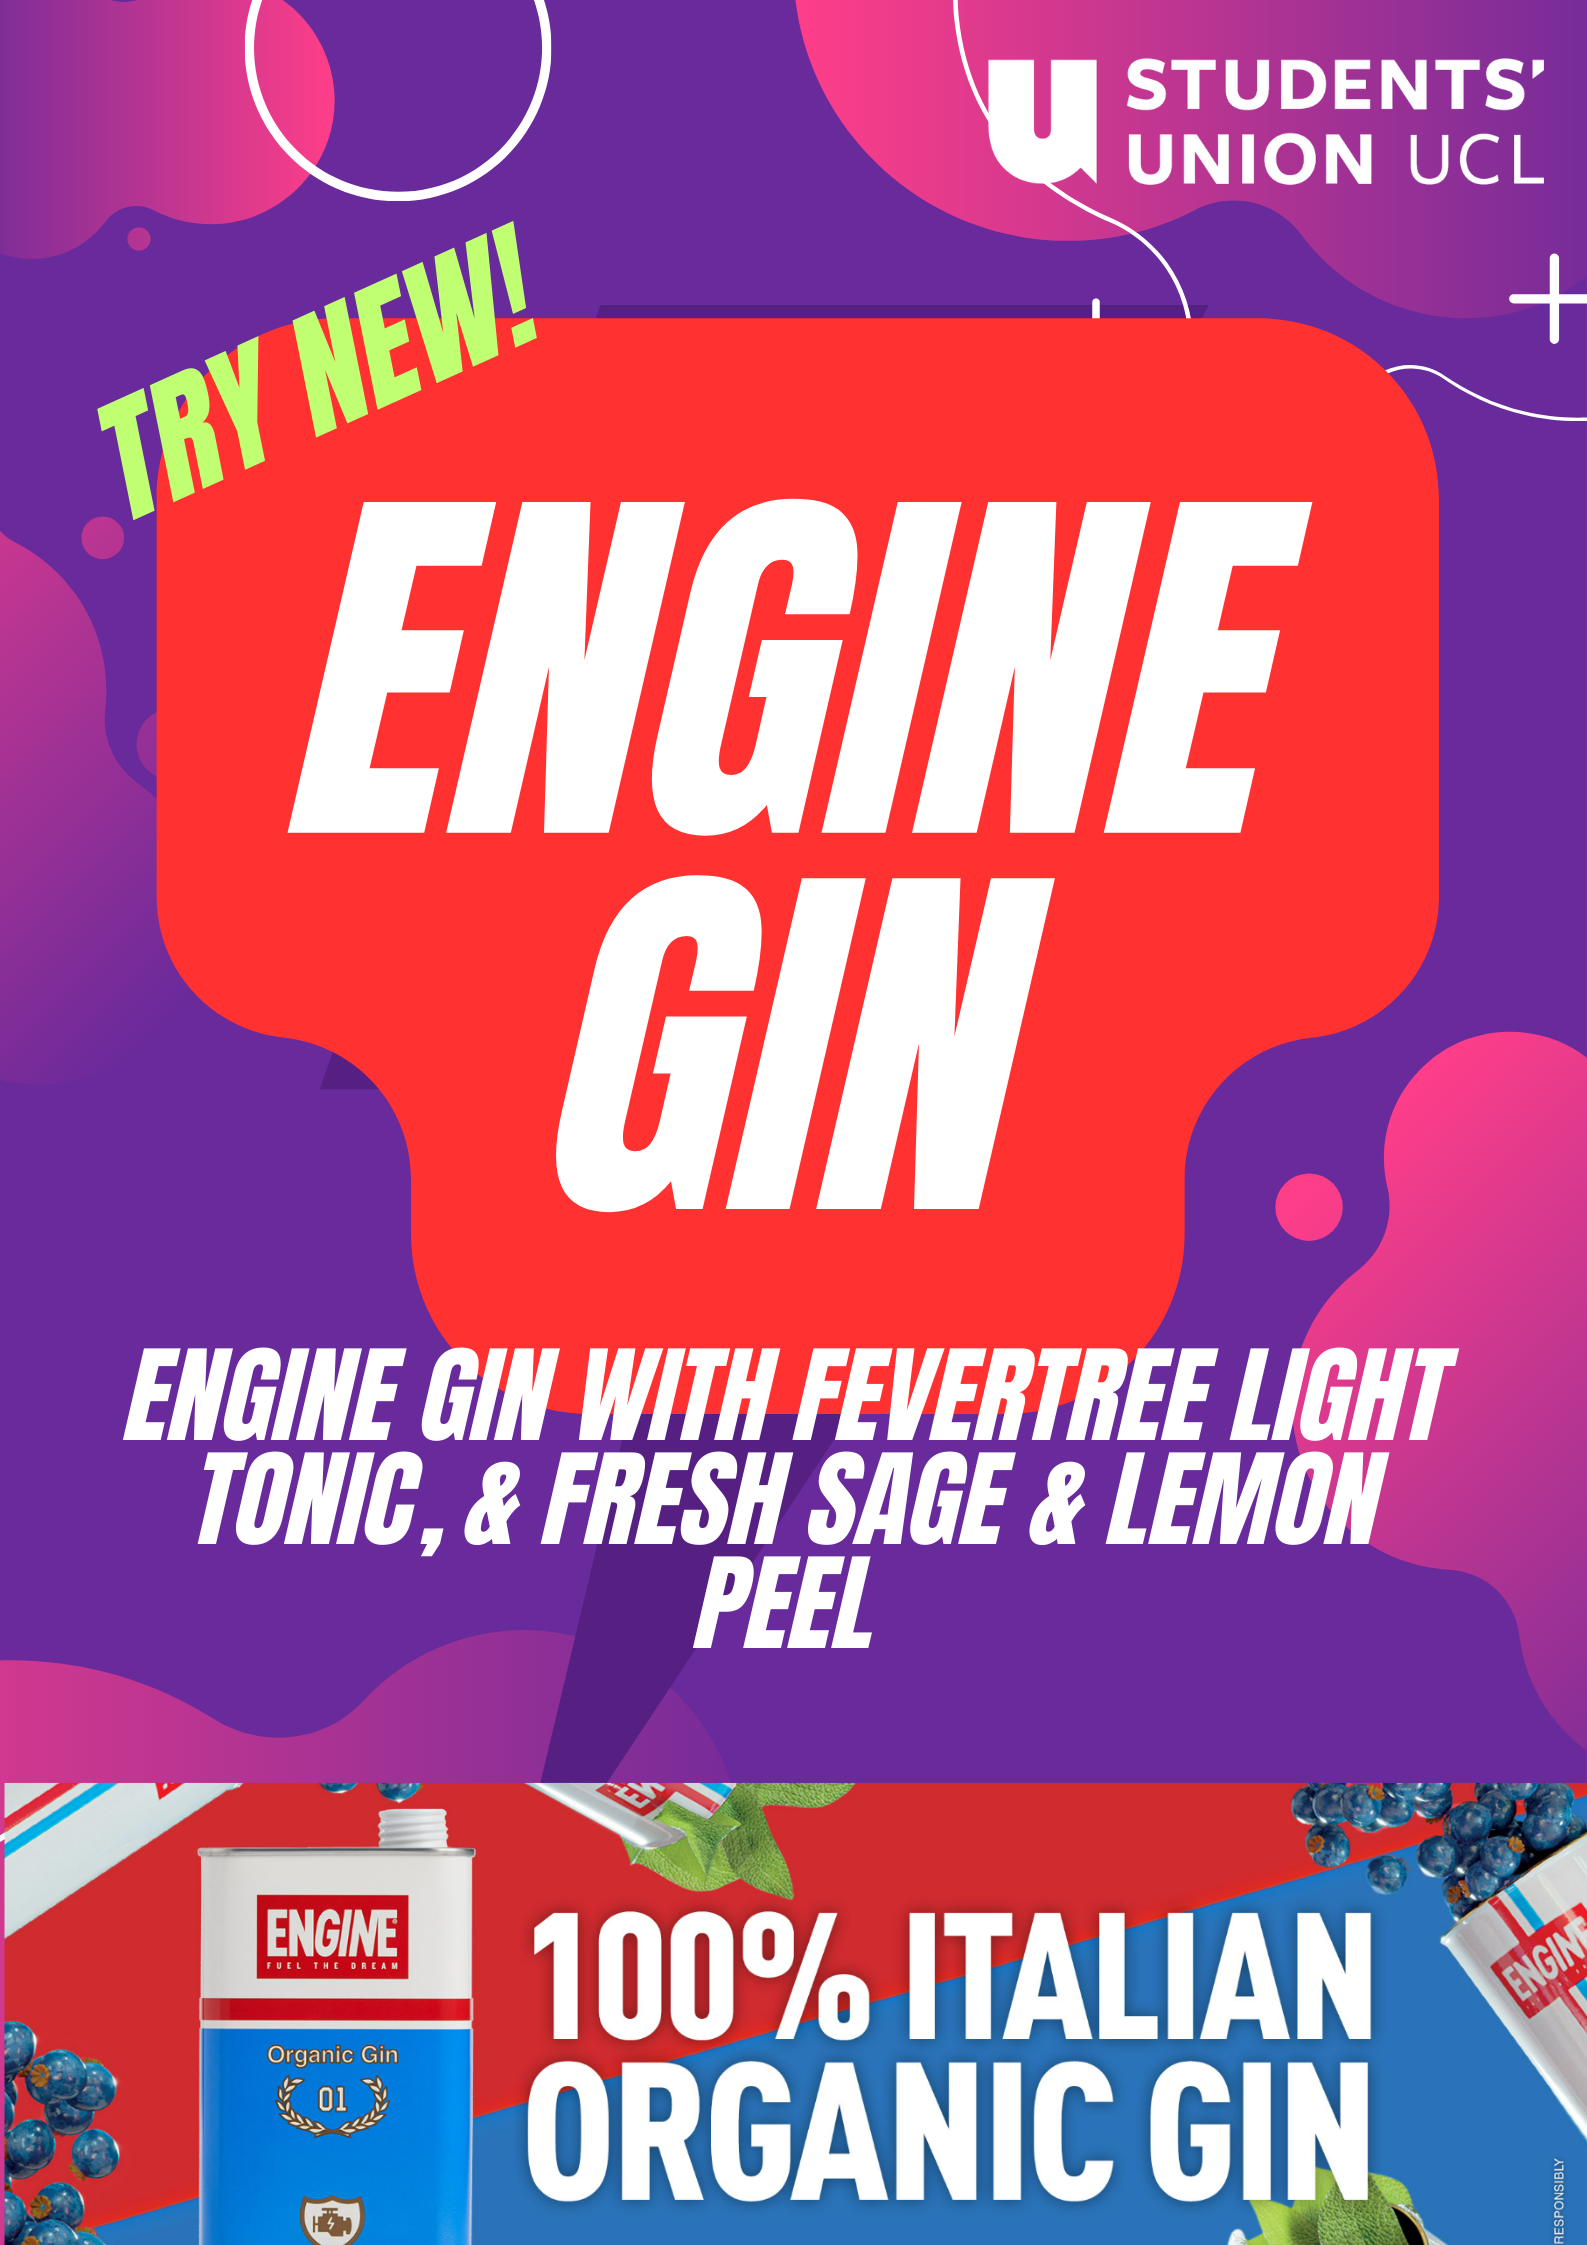 Try something new - Engine Gin!